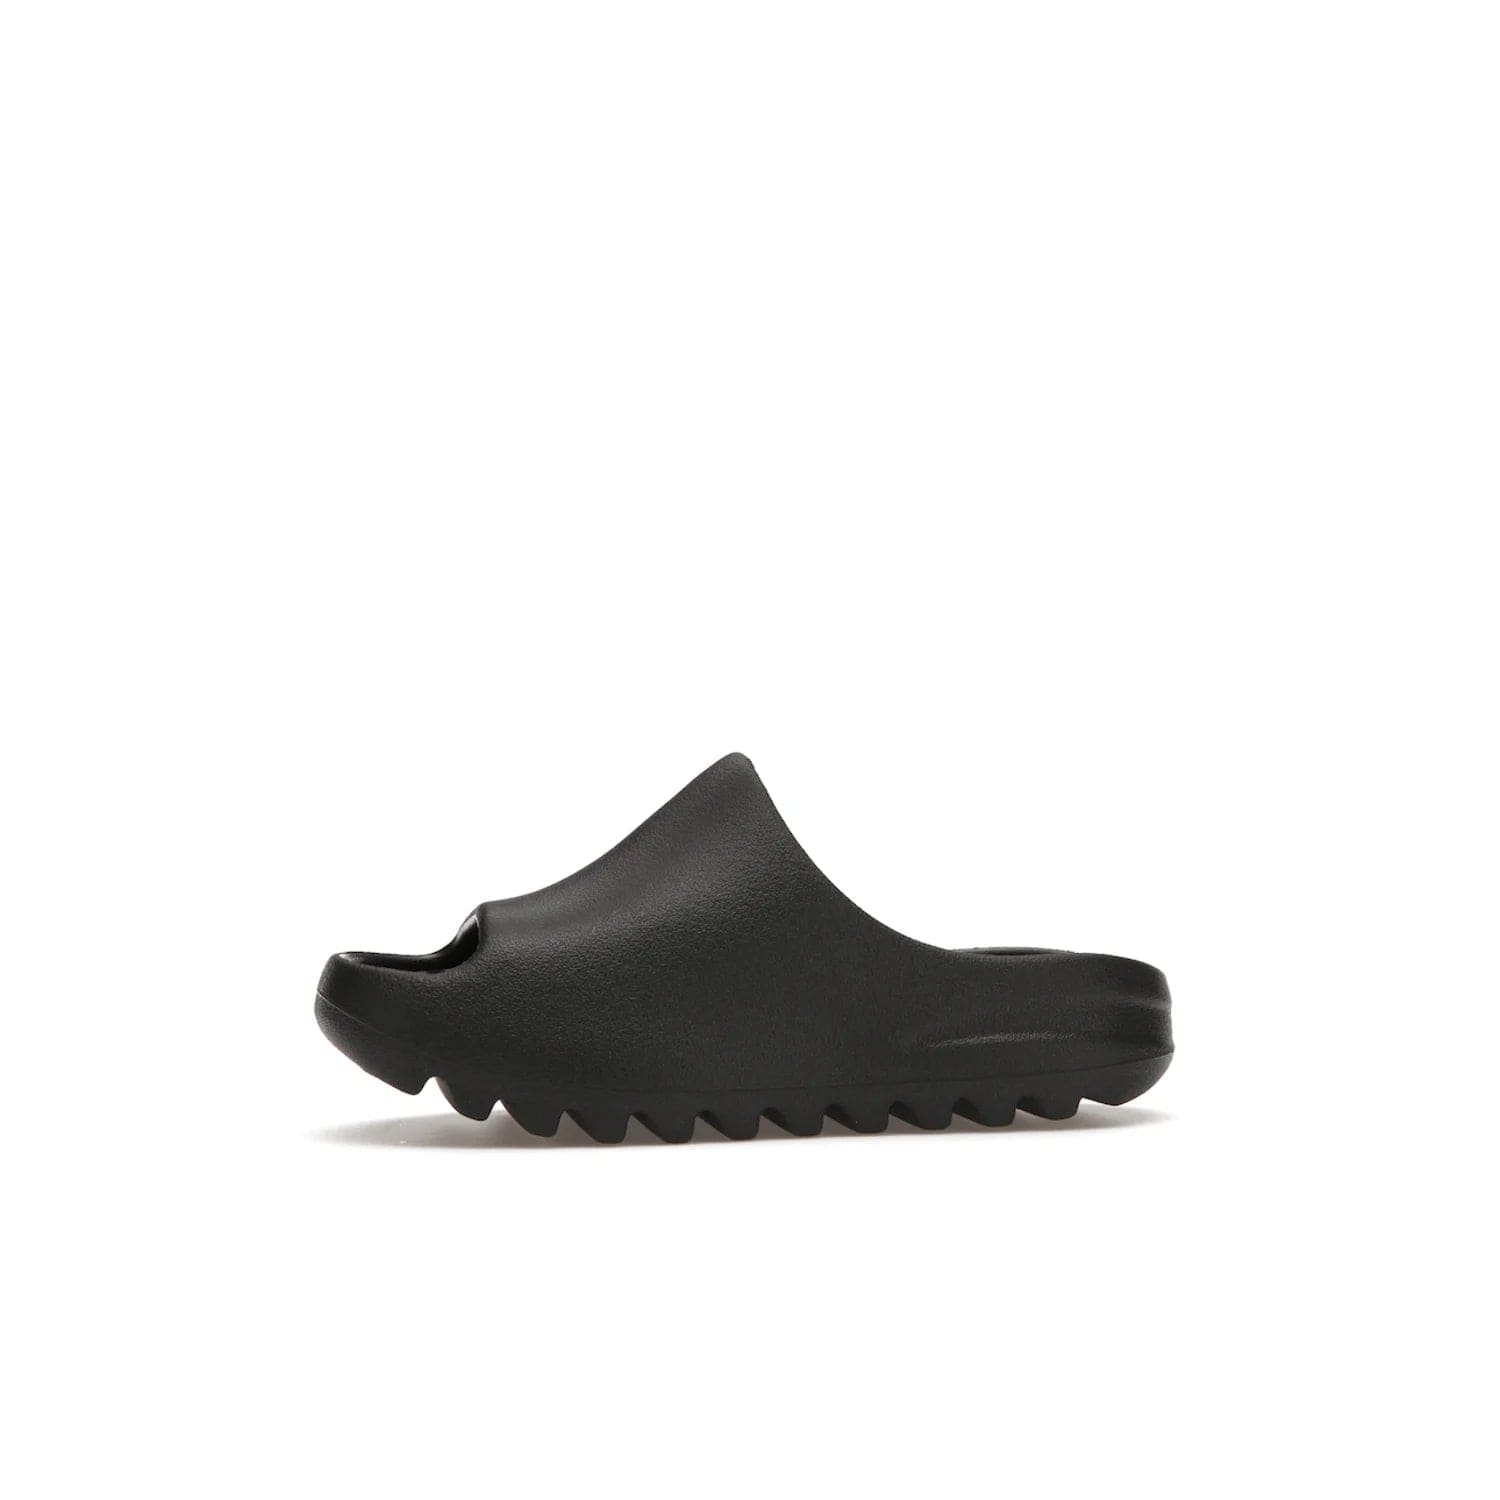 adidas Yeezy Slide Onyx (Kids) - Image 18 - Only at www.BallersClubKickz.com - adidas Yeezy Slide Onyx (Kids): Comfortable foam construction with textured surface and iconic three-stripe logo. Breathable, open-toe design and deep grooves for traction. Released in March 2021 at $50.